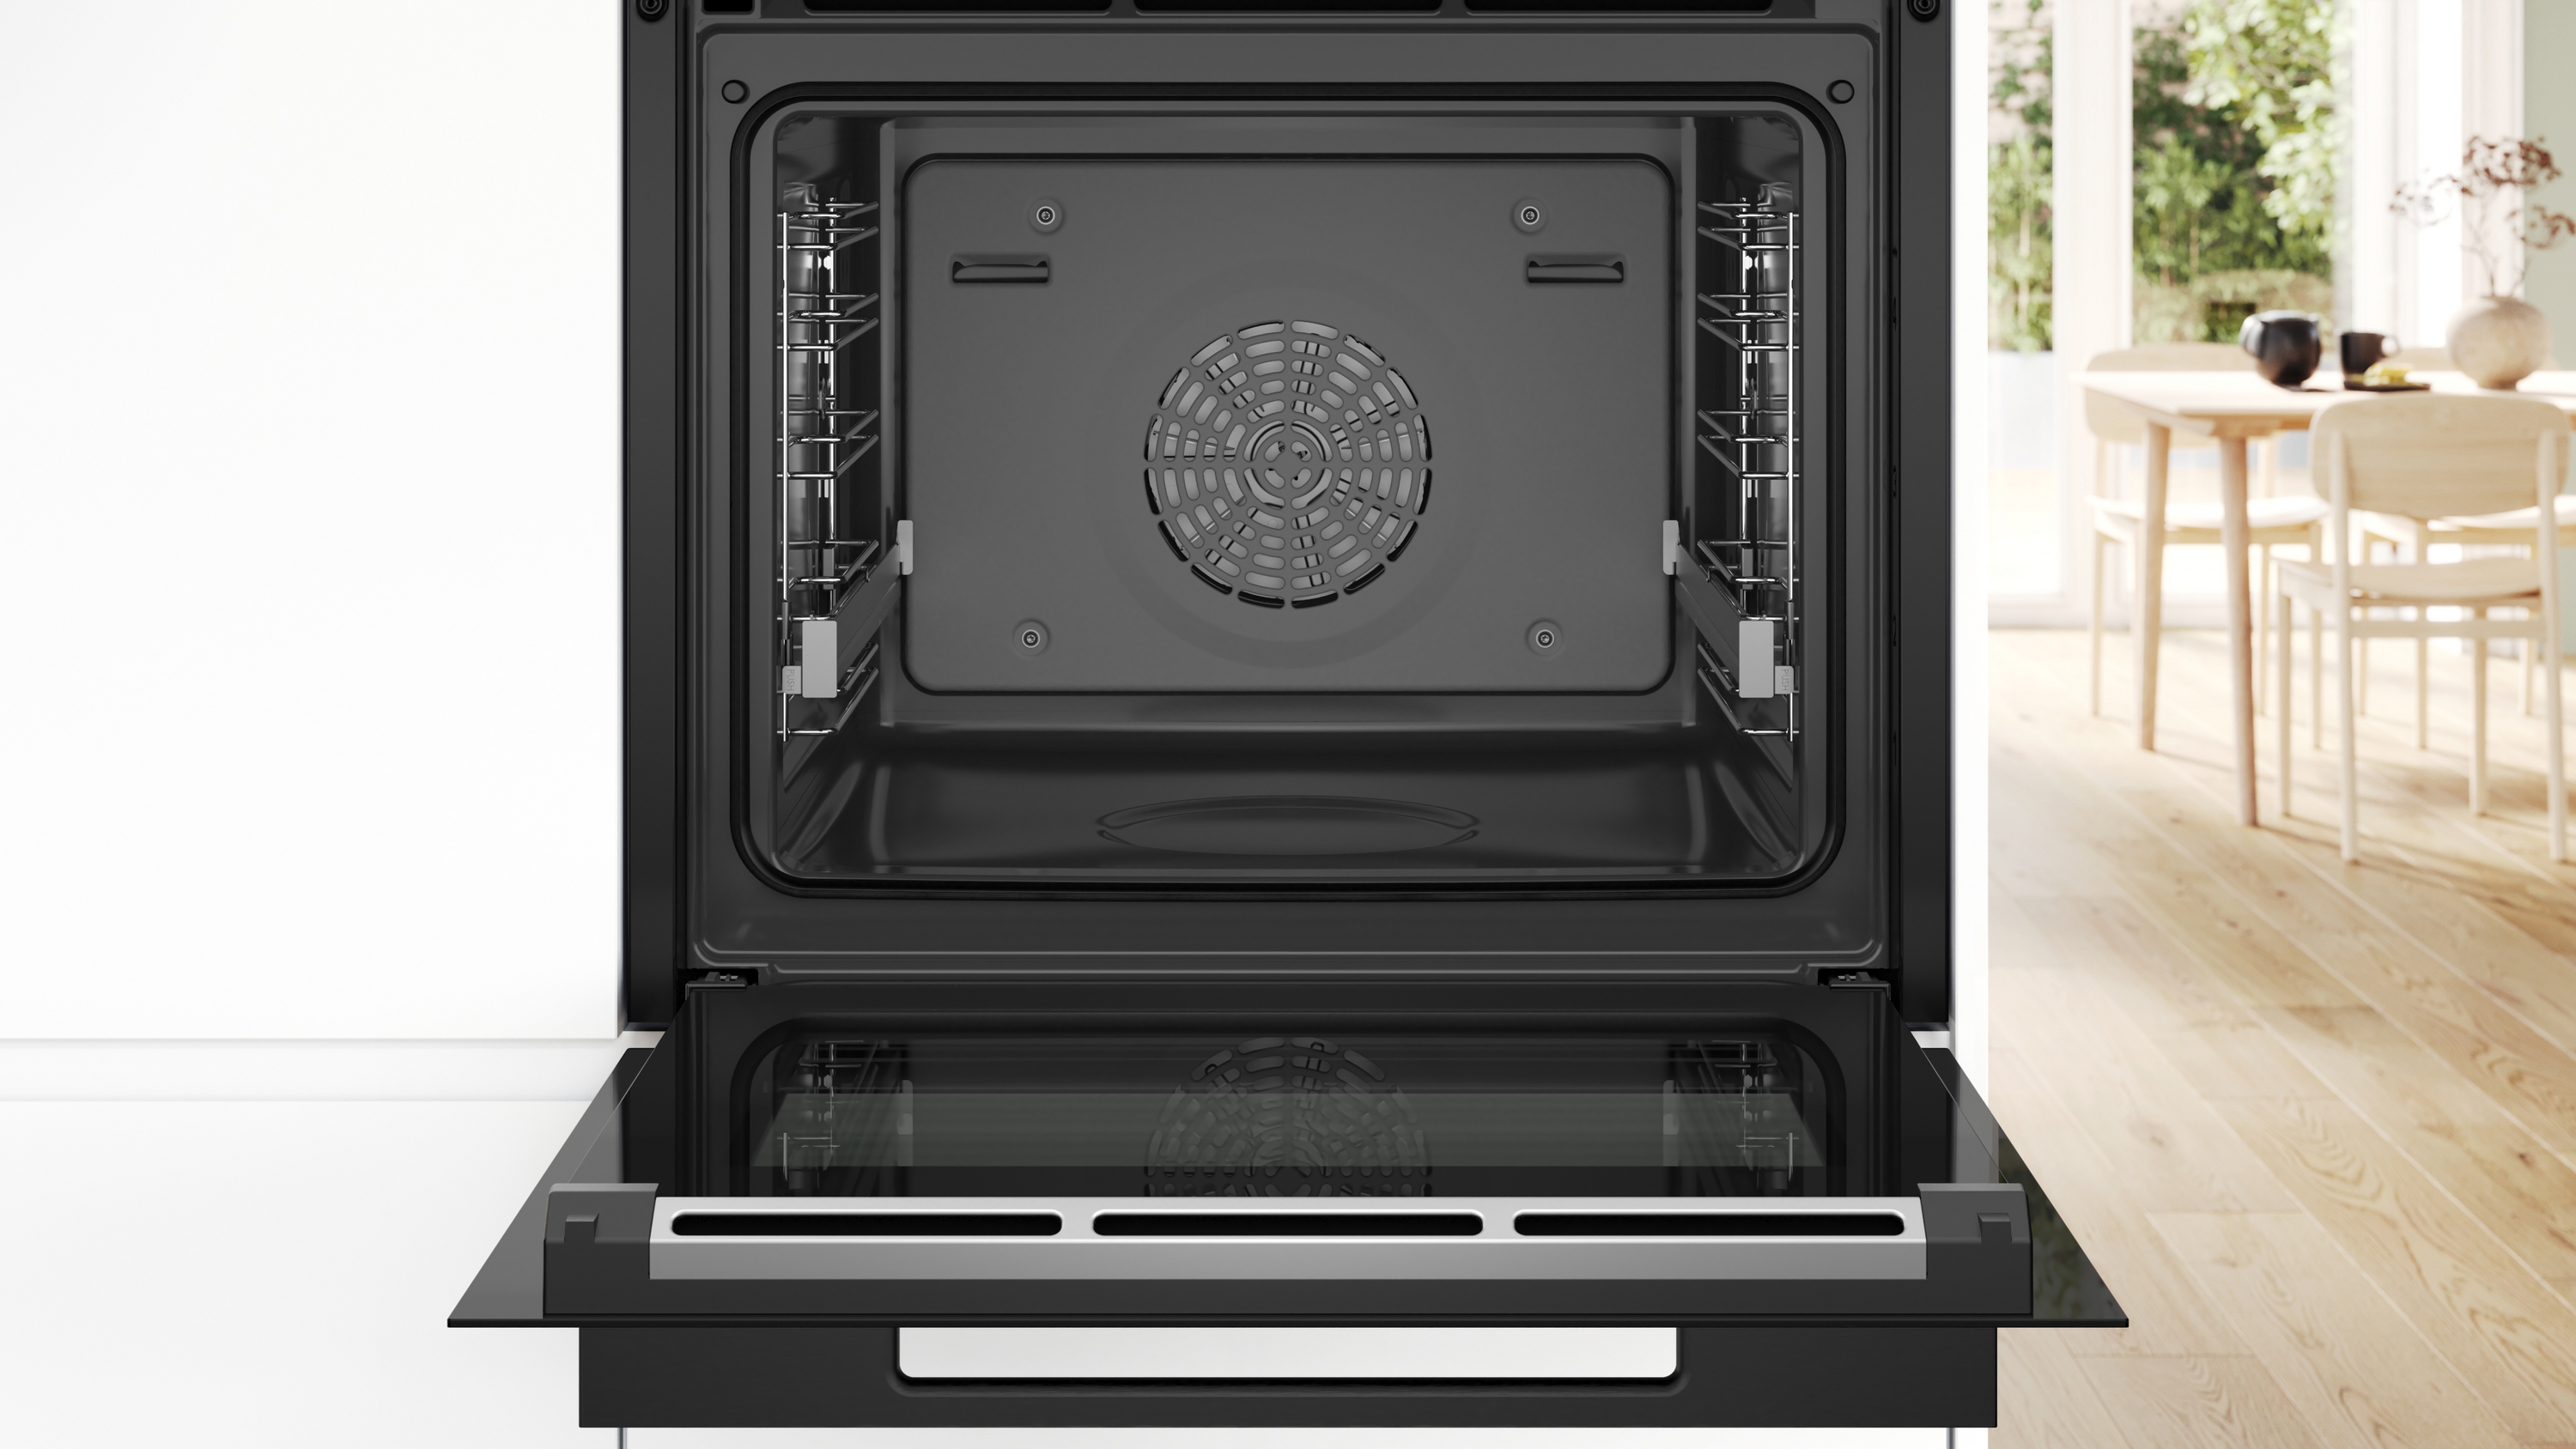 Series 8, Built-in oven with steam function, 60 x 60 cm, Black, HSG936AB1